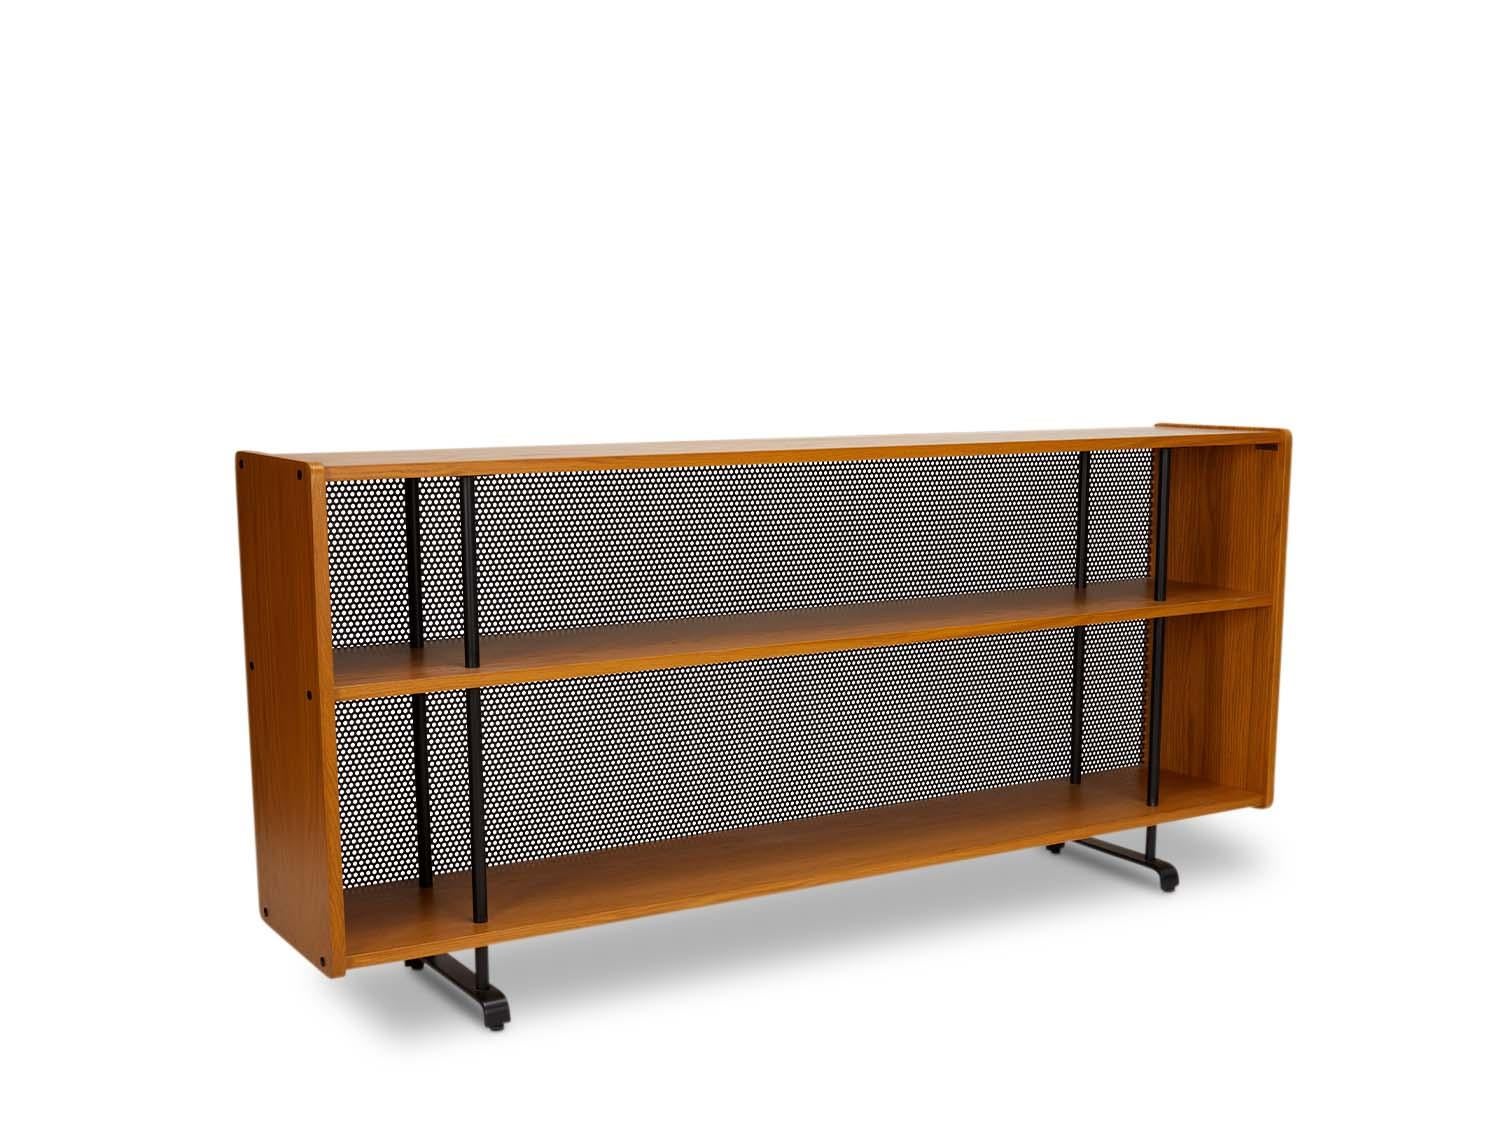 The Maker's console is made of American walnut or white oak and rests on a blackened steel base. Features two shelves and a perforated steel detail on the back. 

 